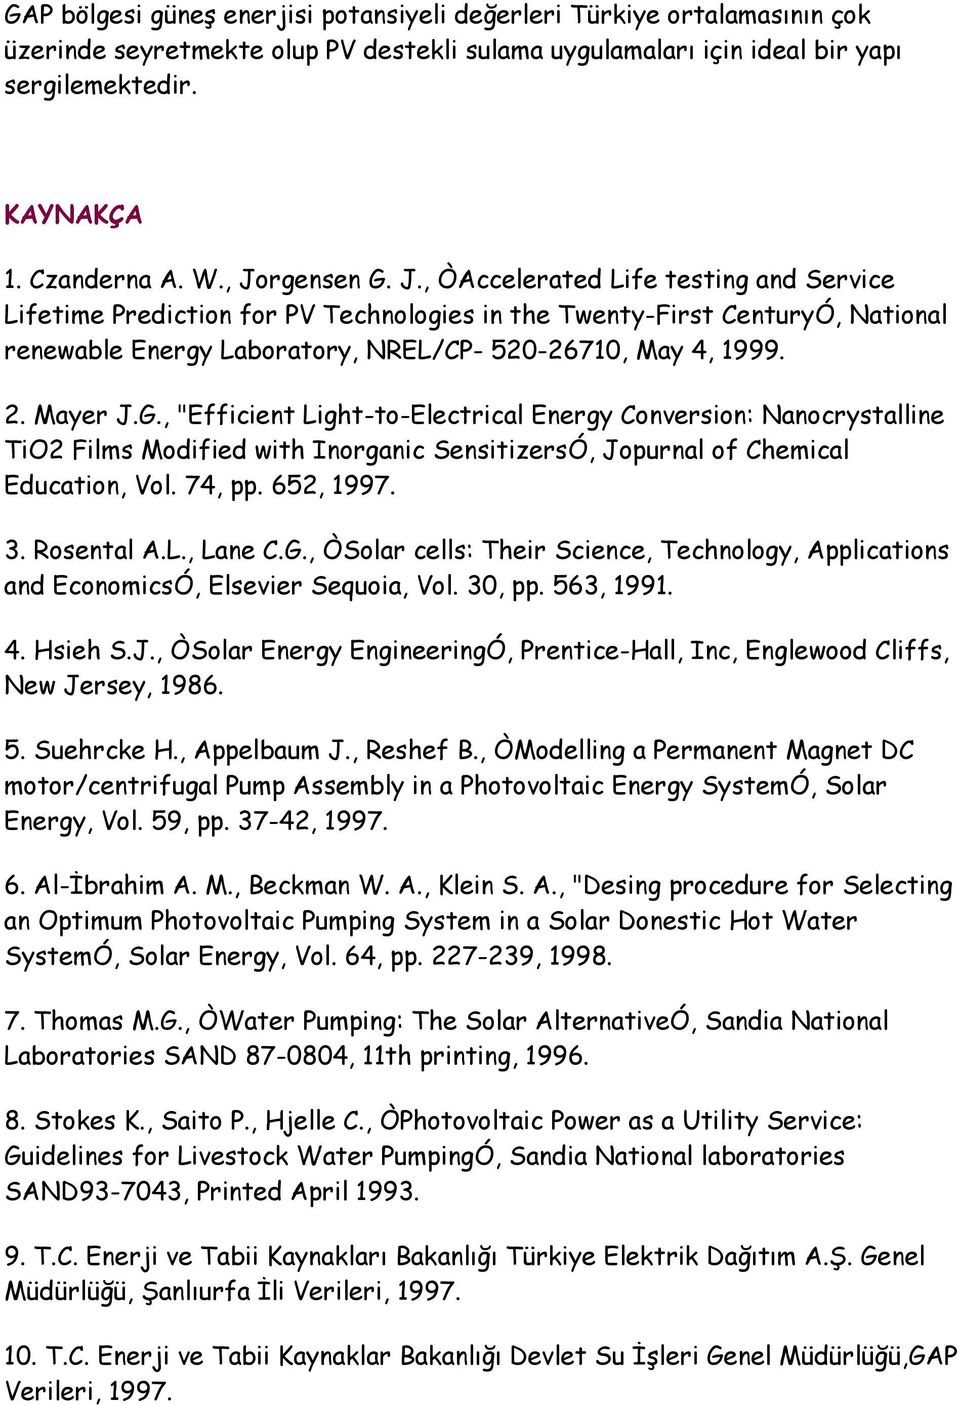 Mayer J.G., "Efficient Light-to-Electrical Energy Conversion: Nanocrystalline TiO2 Films Modified with Inorganic SensitizersÓ, Jopurnal of Chemical Education, Vol. 74, pp. 652, 1997. 3. Rosental A.L., Lane C.